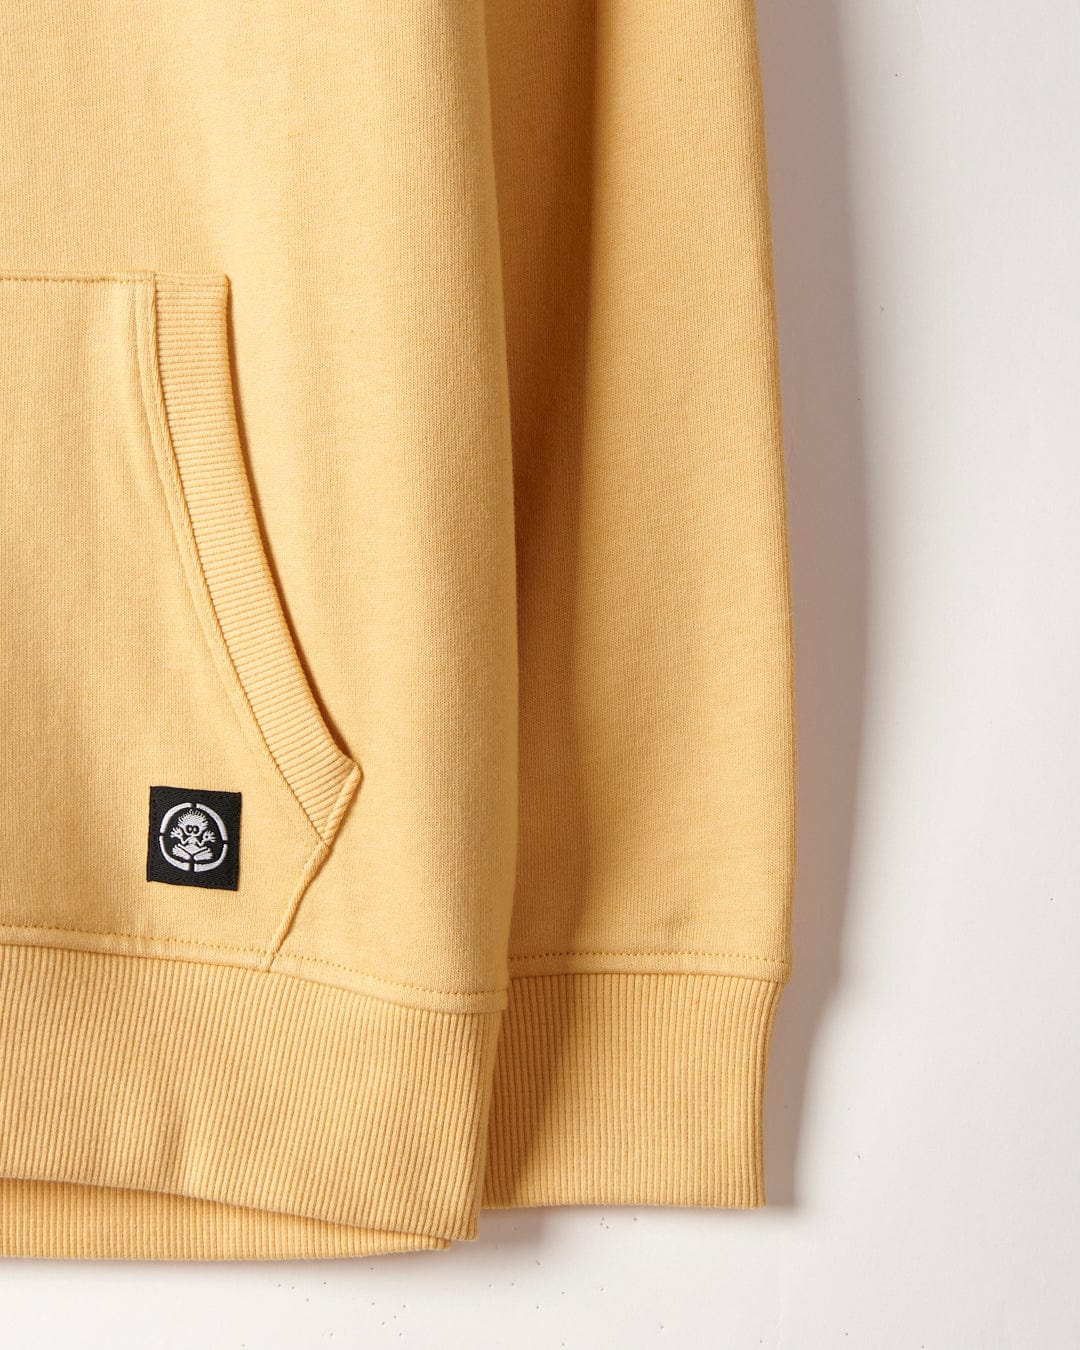 Yellow Waveline - Kids Pop Hoodie detail showing sleeve and waist ribbing with a small Saltrock black logo patch on the kangaroo pocket.